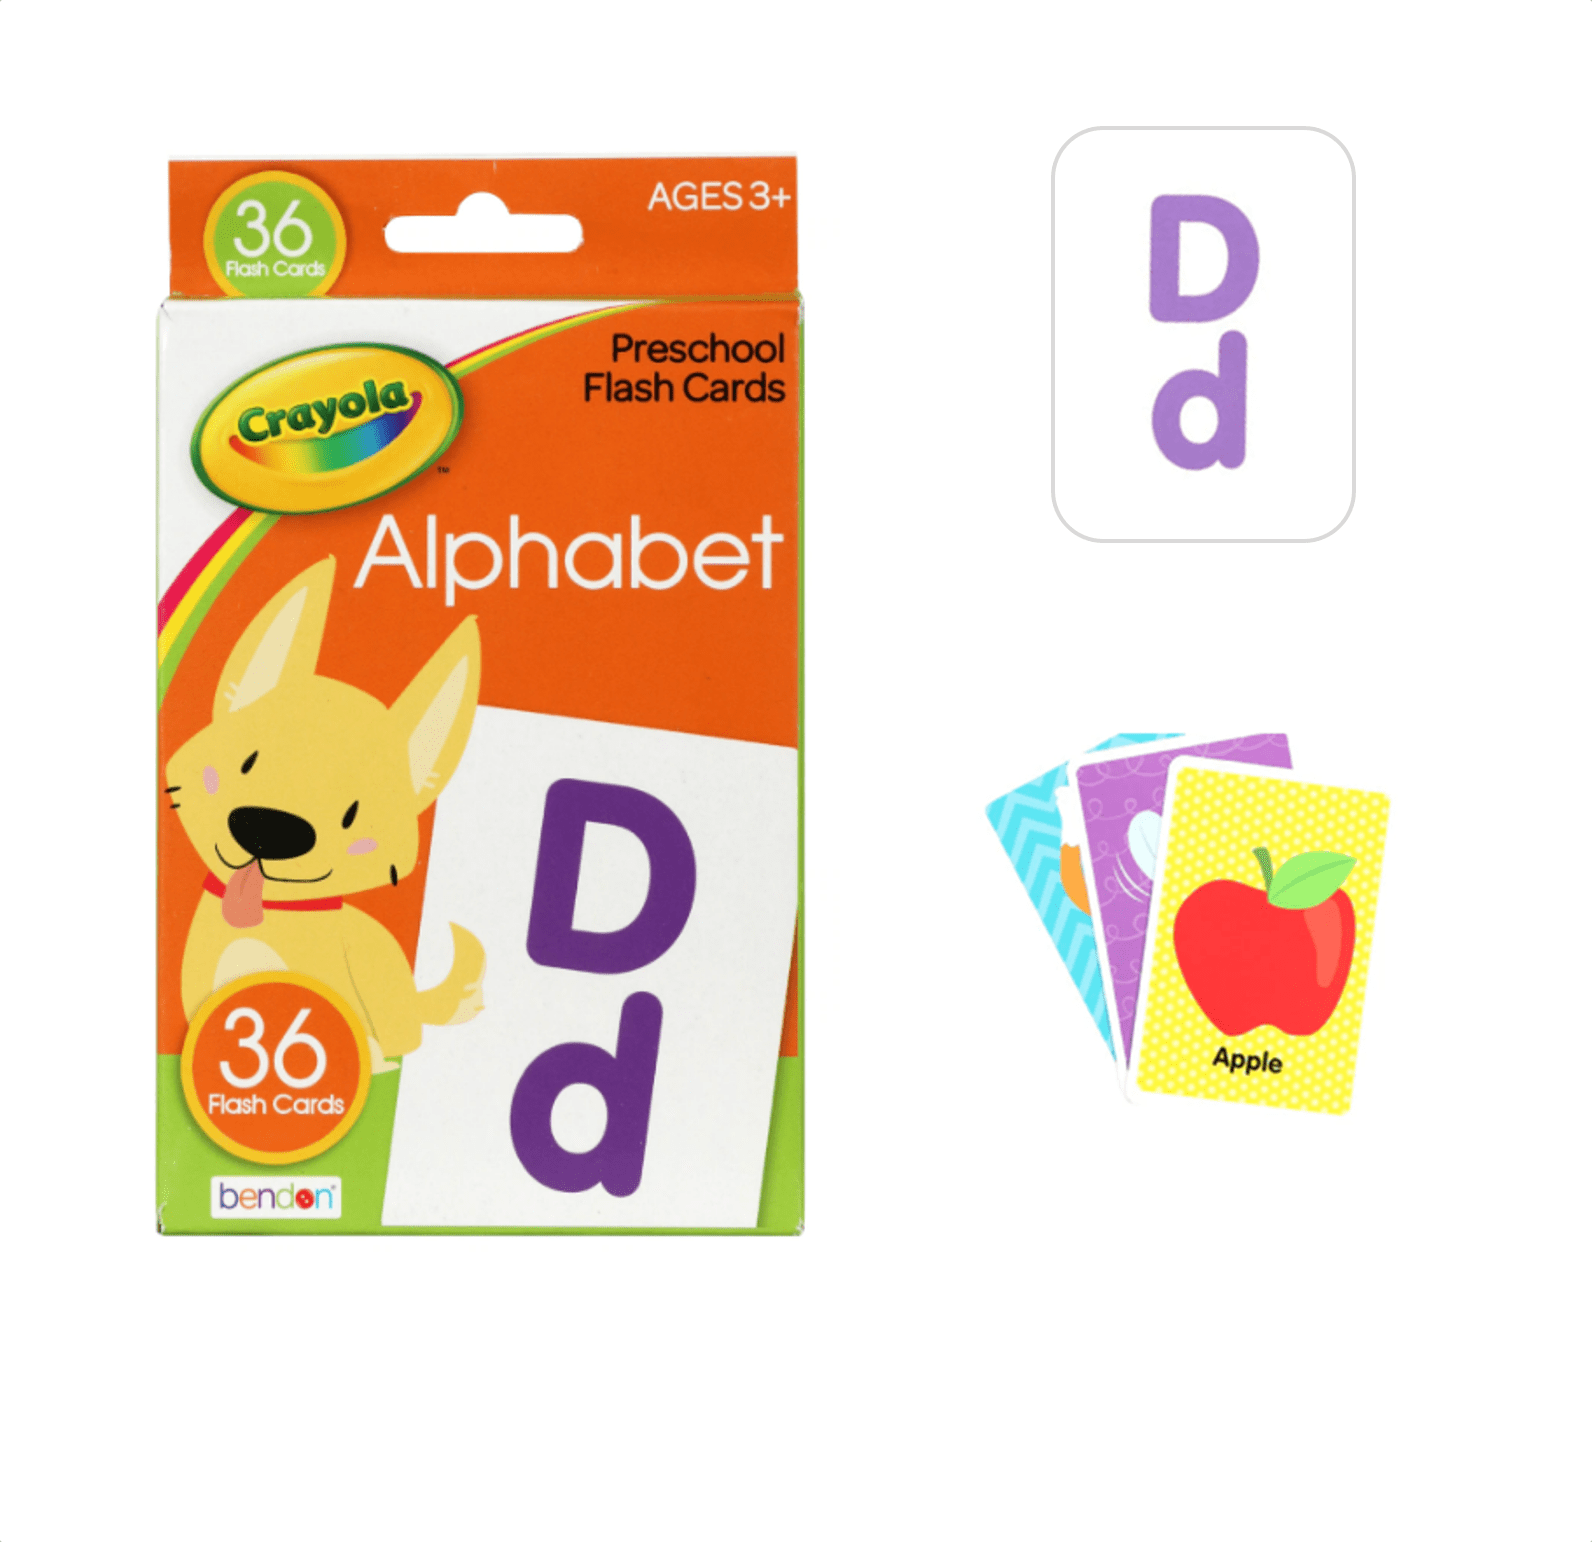 Crayola 36 Count Preschool Learning Flashcards for Kids Alphabet & Counting Pack 